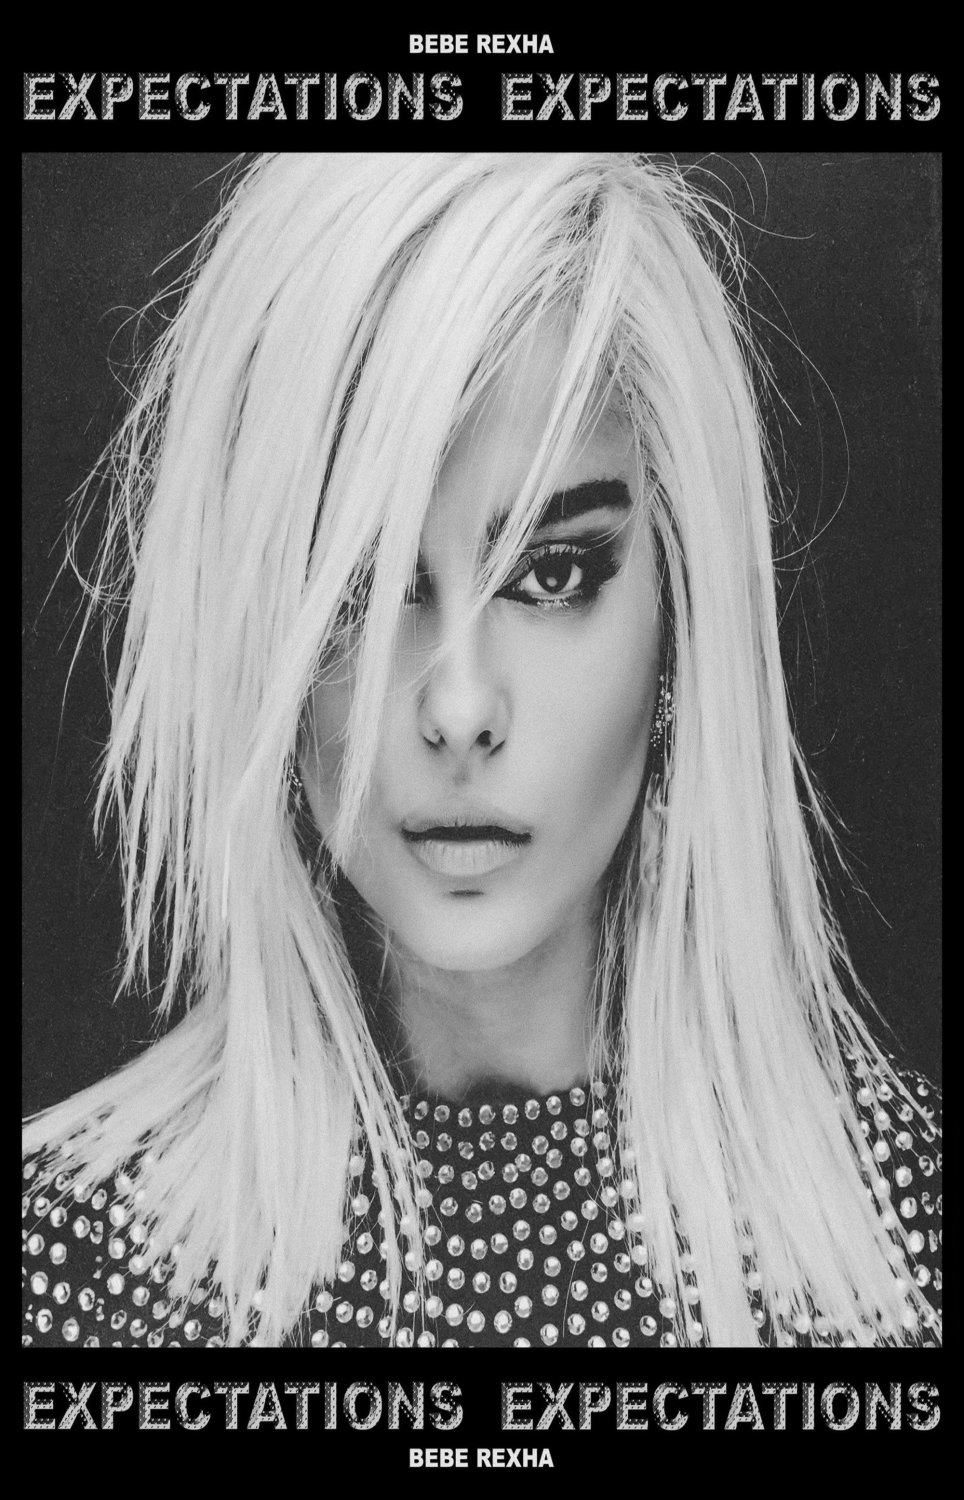 Bebe Rexha Expectations   13"x19" (32cm/49cm) Polyester Fabric Poster